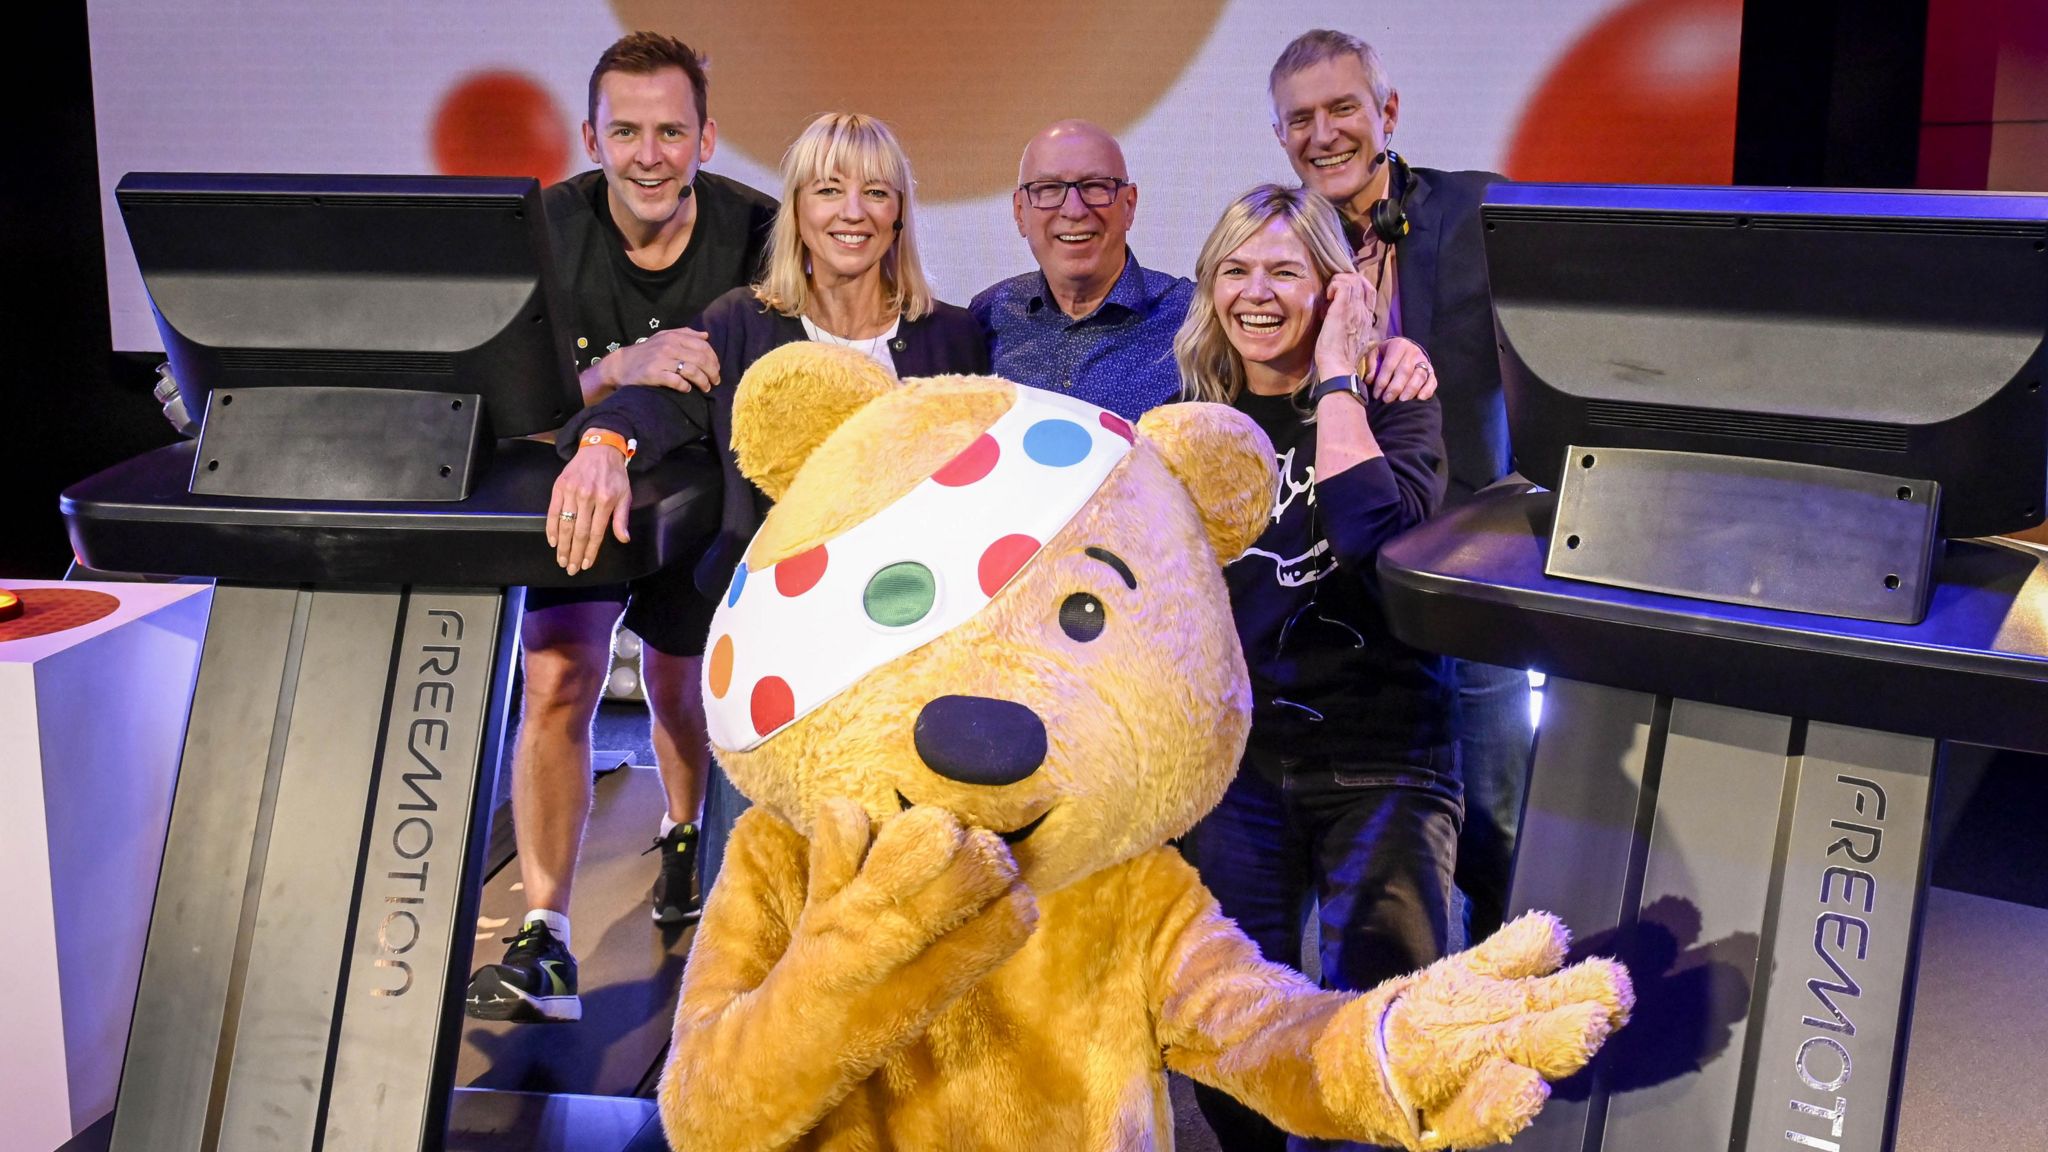 Scott Mills and his Radio 2 colleagues